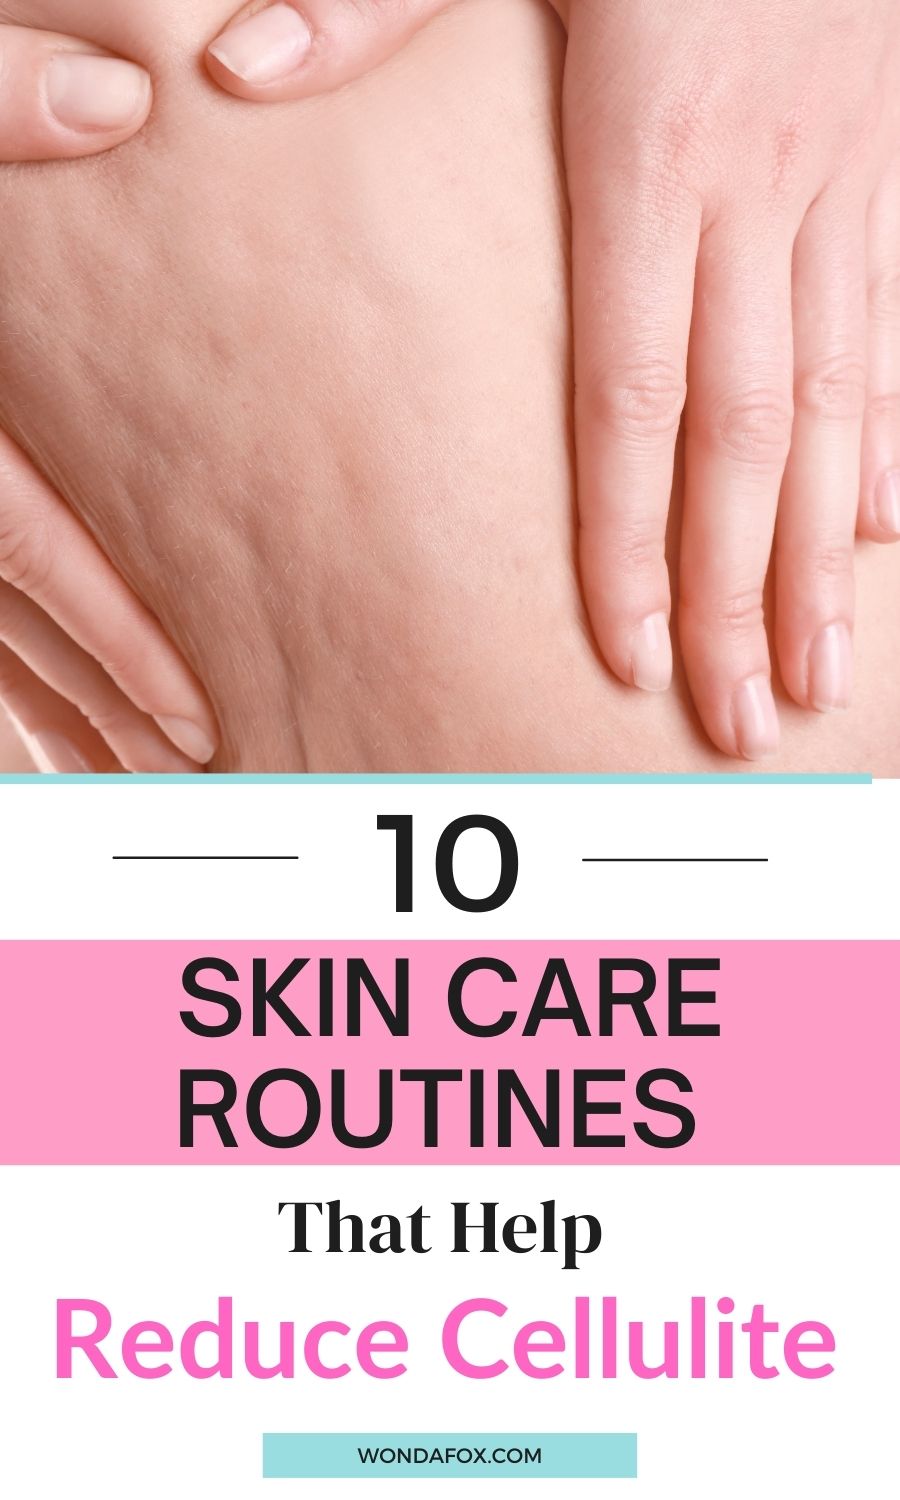 10 Skin Care Routines That Help Reduce Cellulite